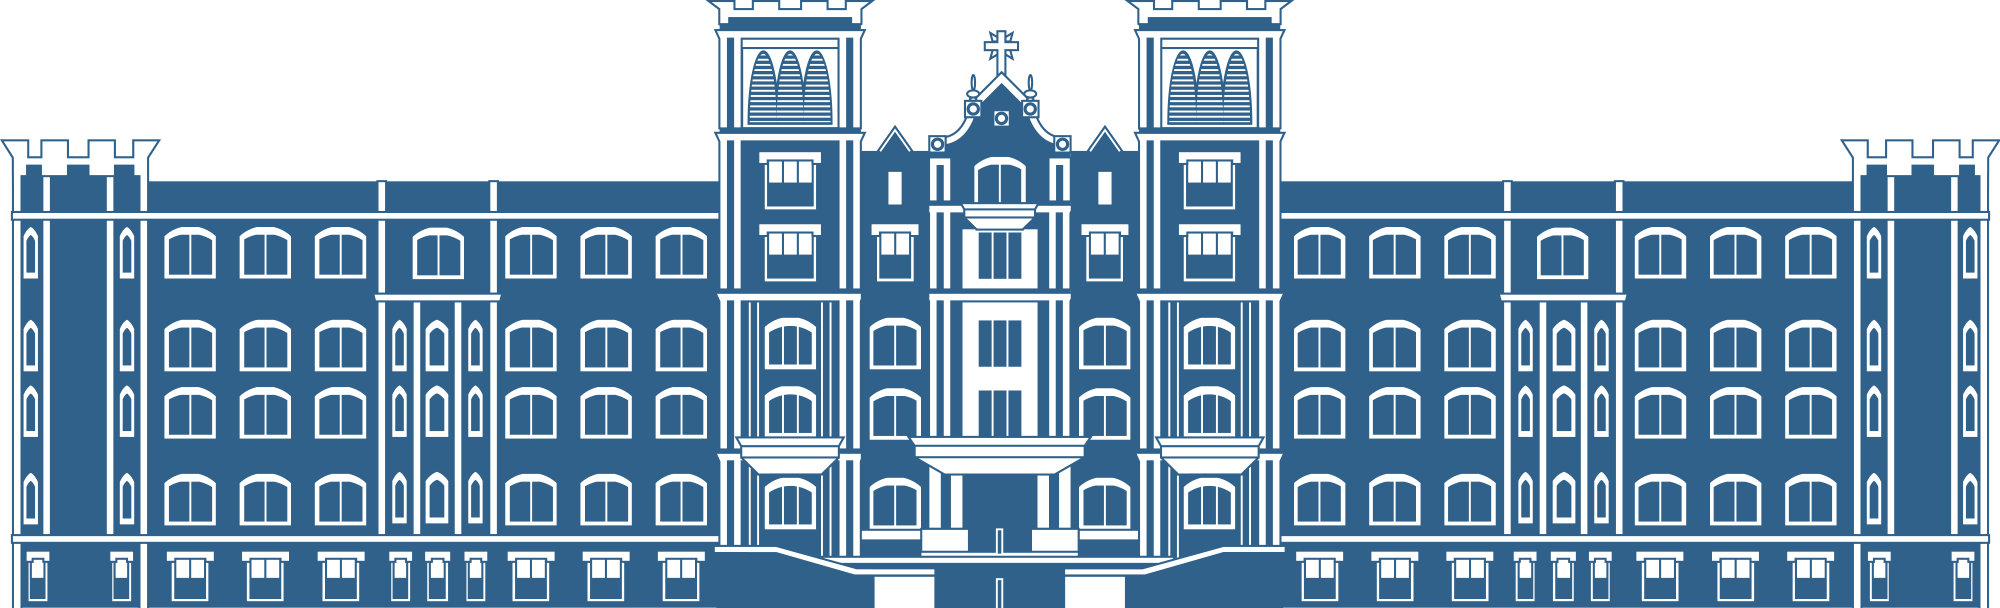 An illustration of St. Scholastica's Tower Hall.